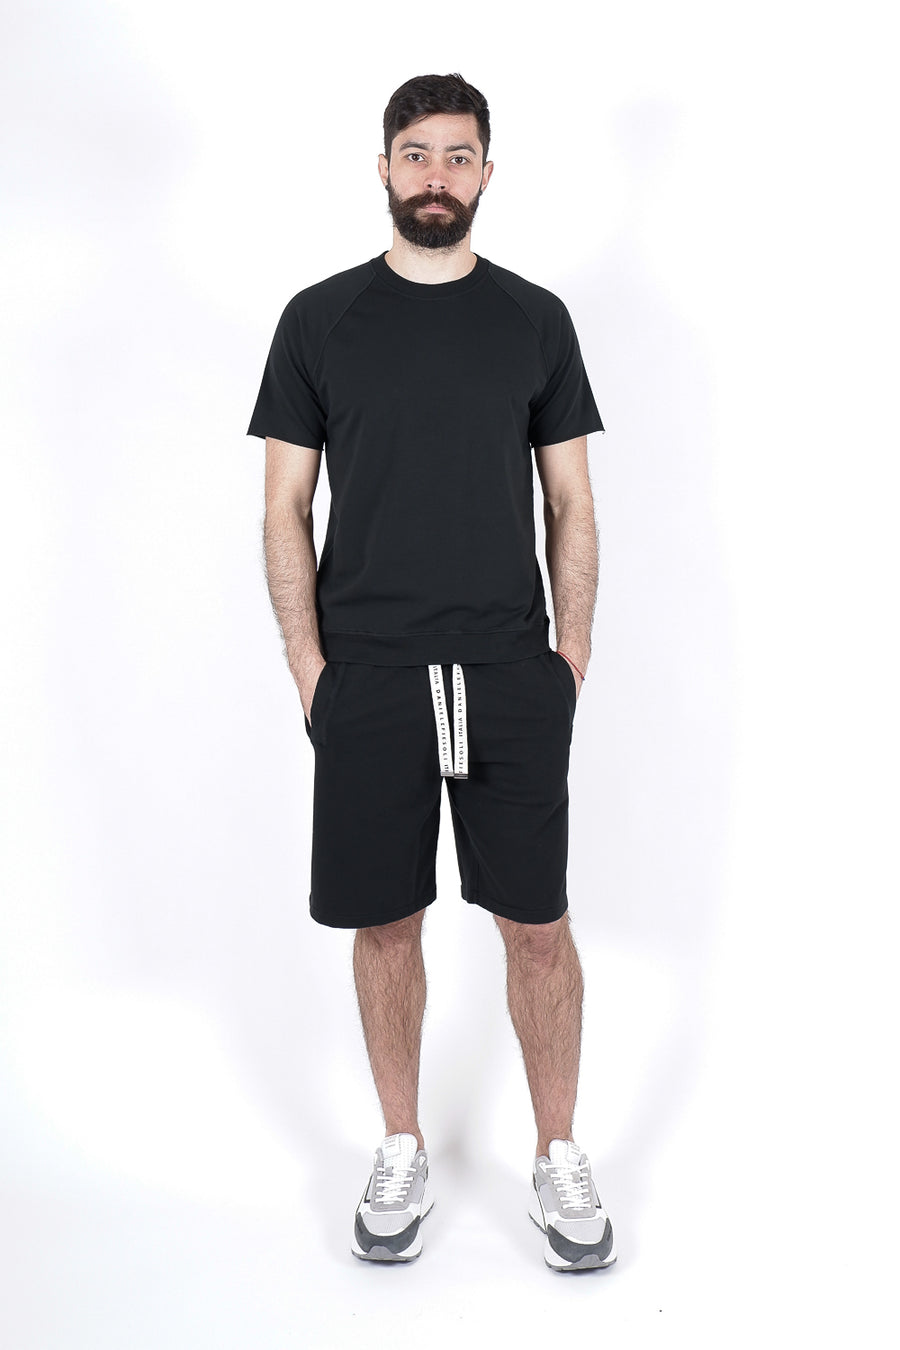 Buy the Daniele Fiesoli Cotton Shorts in Black at Intro. Spend £50 for free UK delivery. Official stockists. We ship worldwide.